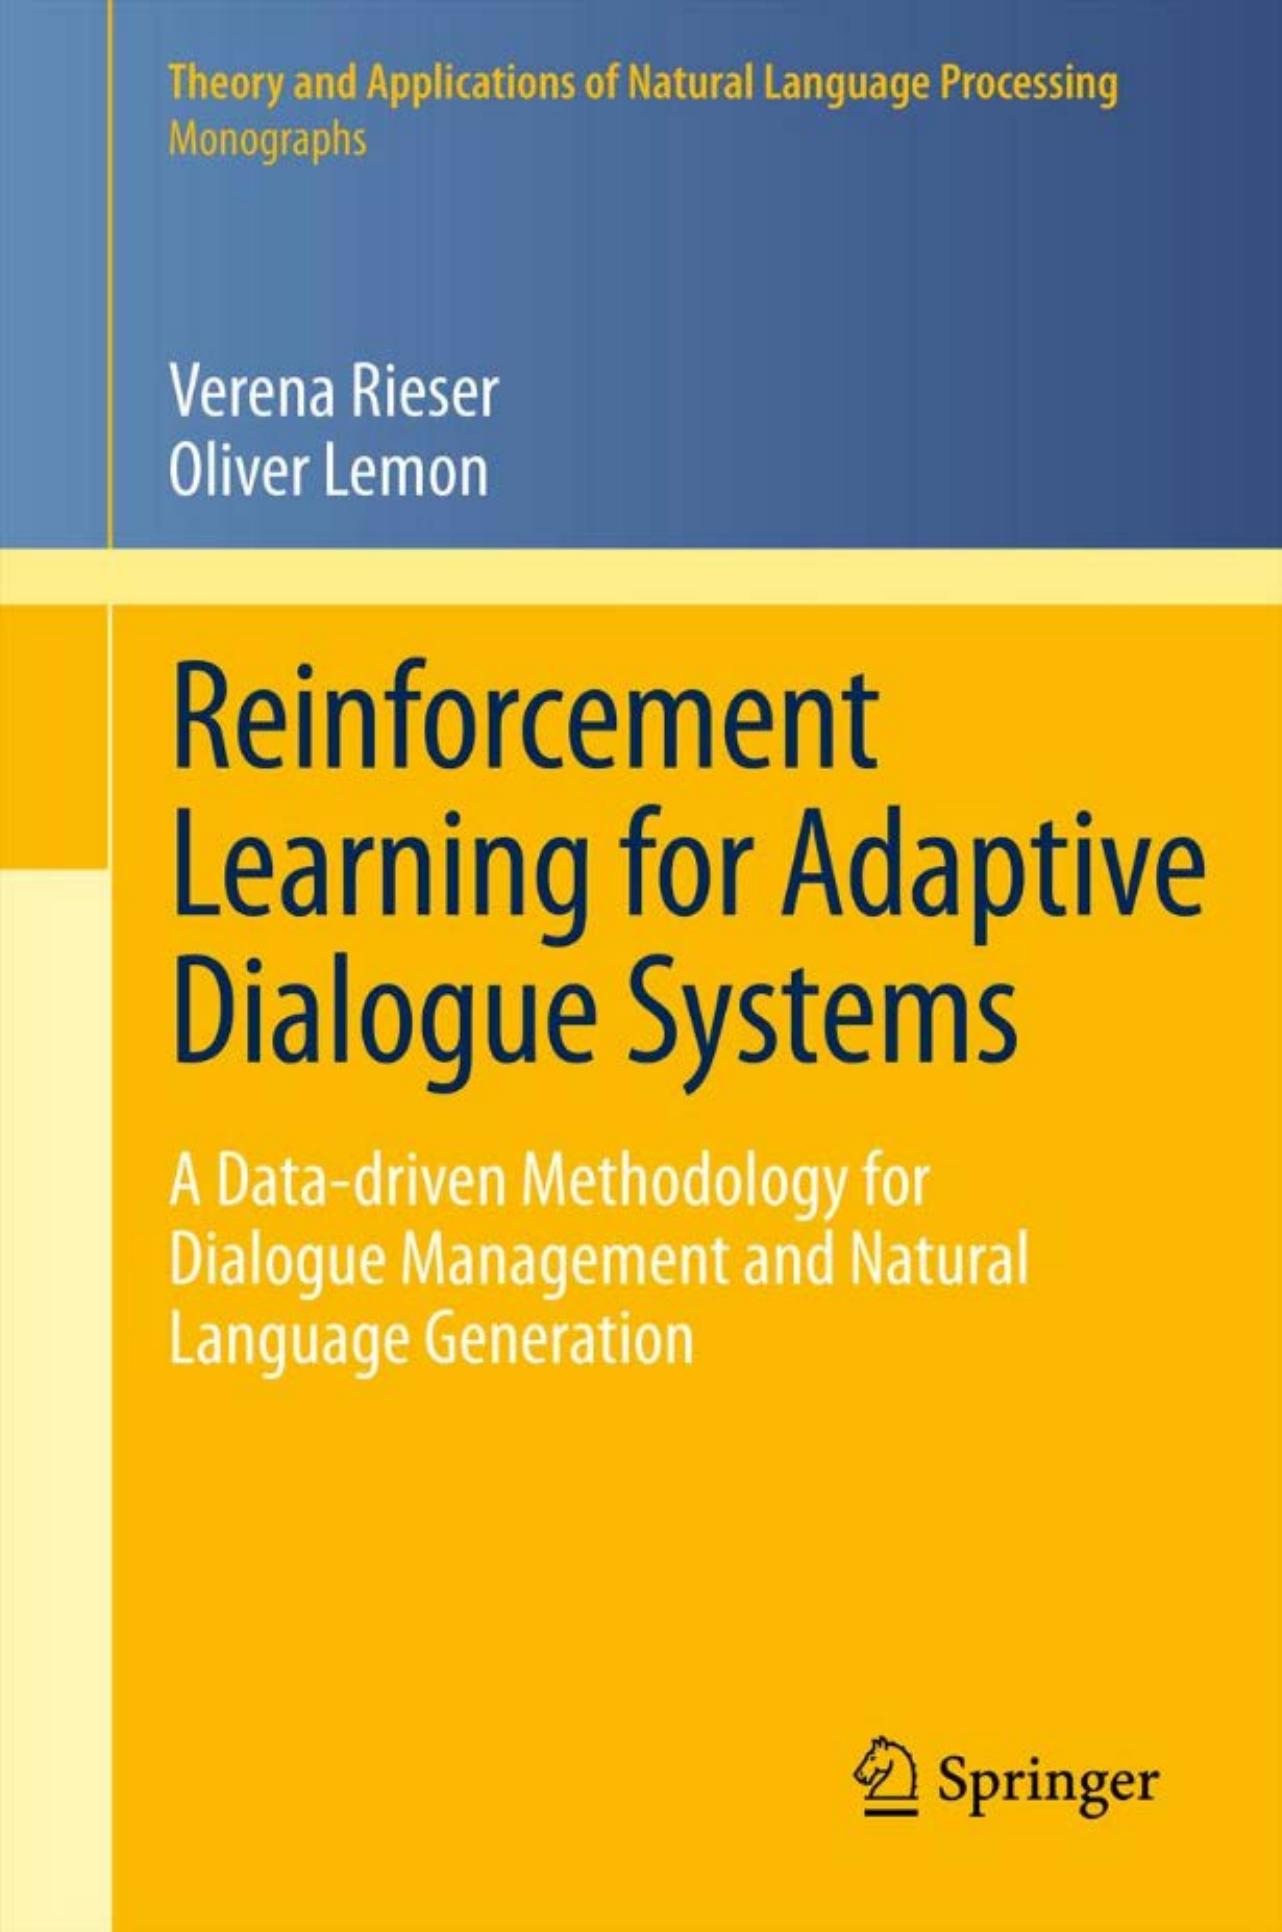 Reinforcement Learning for Adaptive Dialogue Systems: A Data-driven Methodology for Dialogue Management and Natural Language Generation (Theory and Applications of Natural Language Processing)